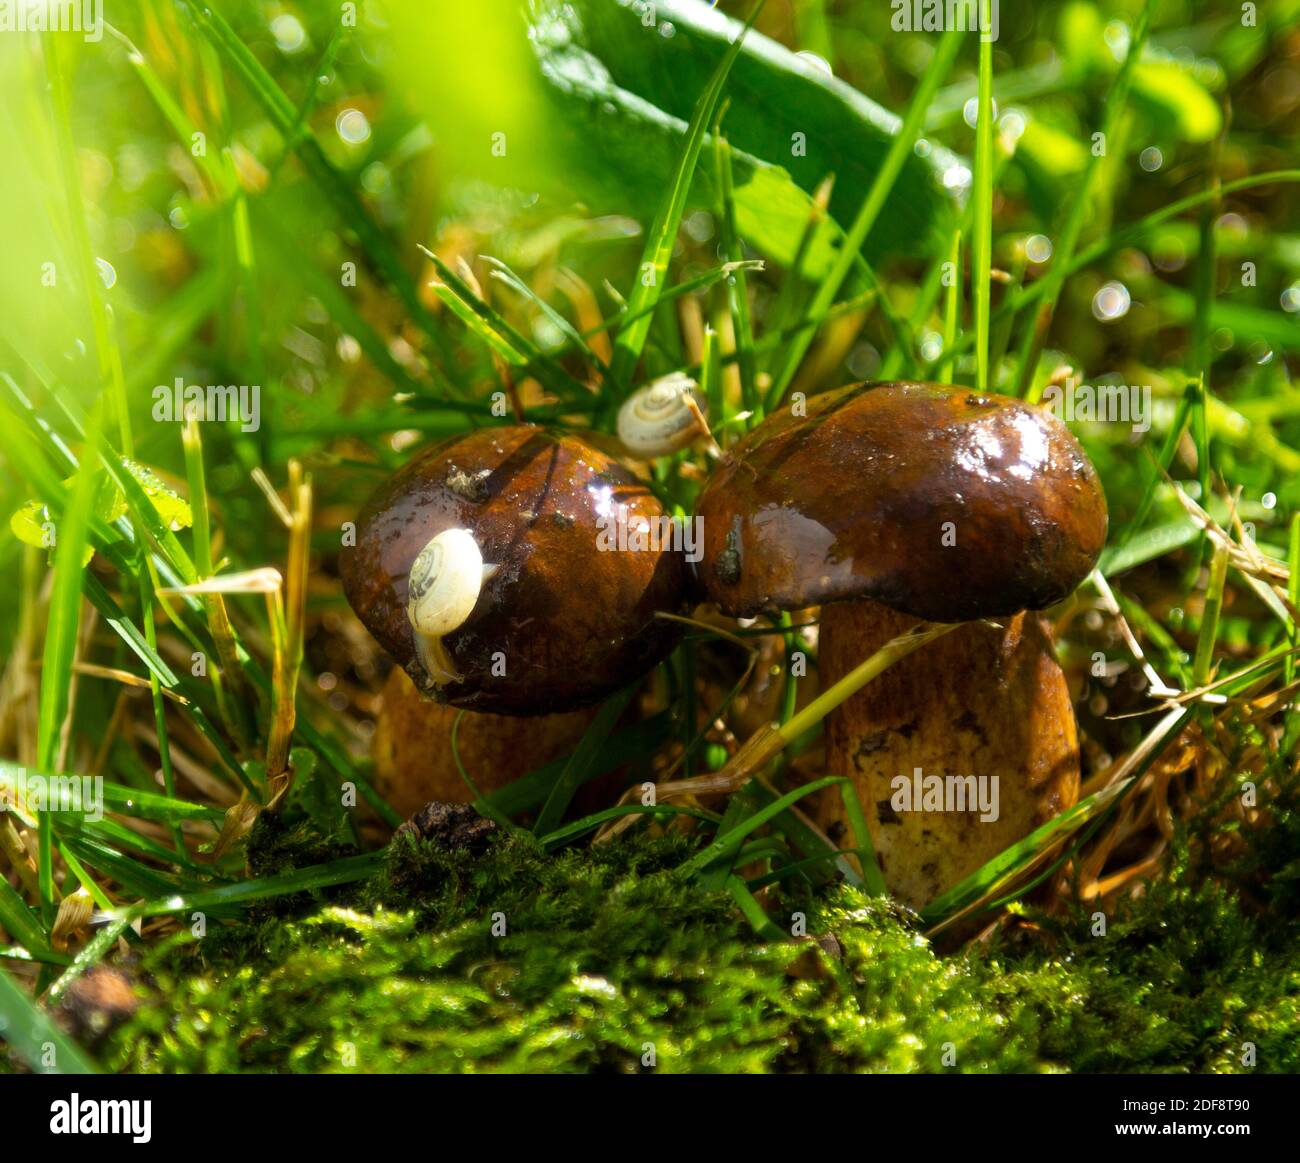 Tha snails on the mushrooms. Forest After the rain. Stock Photo